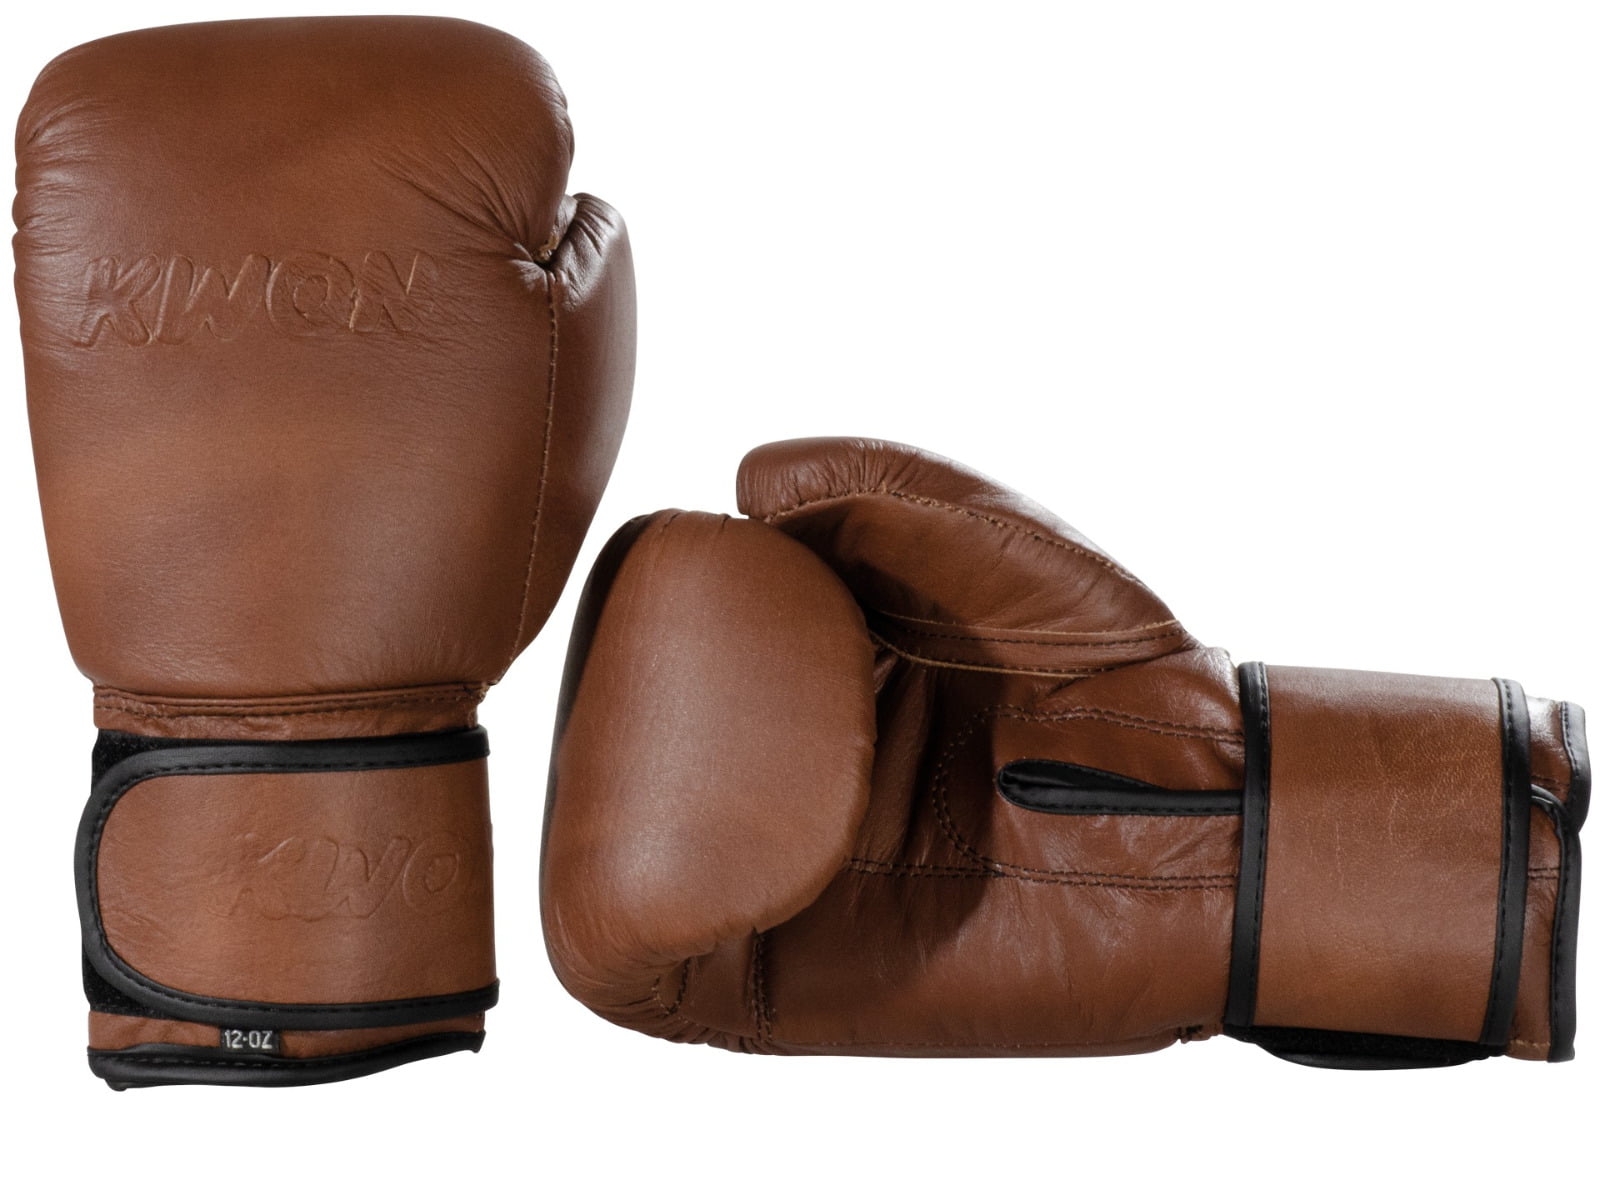 leather vintage / retro brown boxing gloves 2